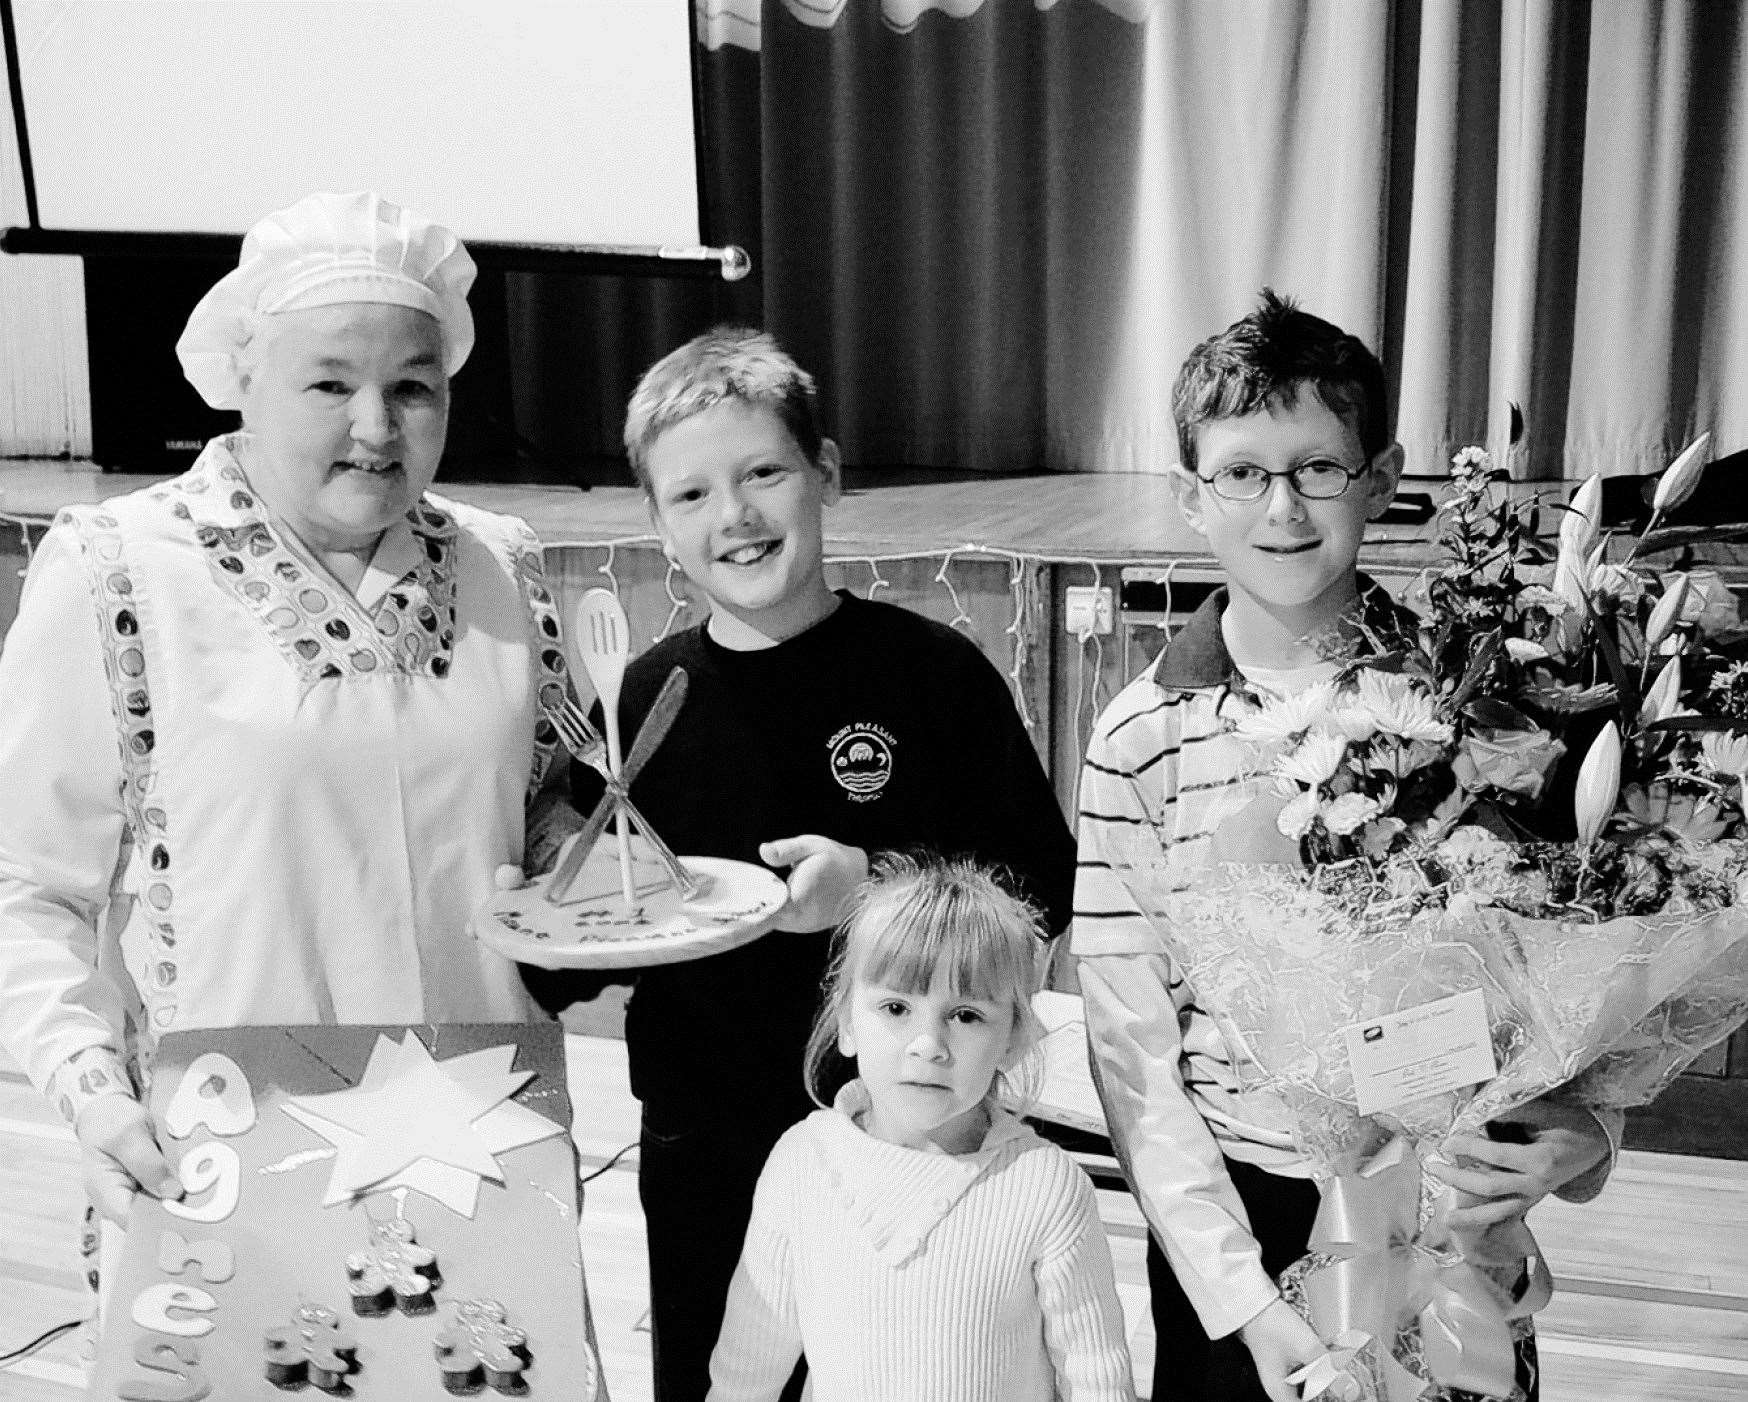 Agnes Andrews, cook in charge at Mount Pleasant school, received gifts from pupils Callum McClelland, Ryan Riddell and Caitlin Farquhar to mark her retirement in December 2006.